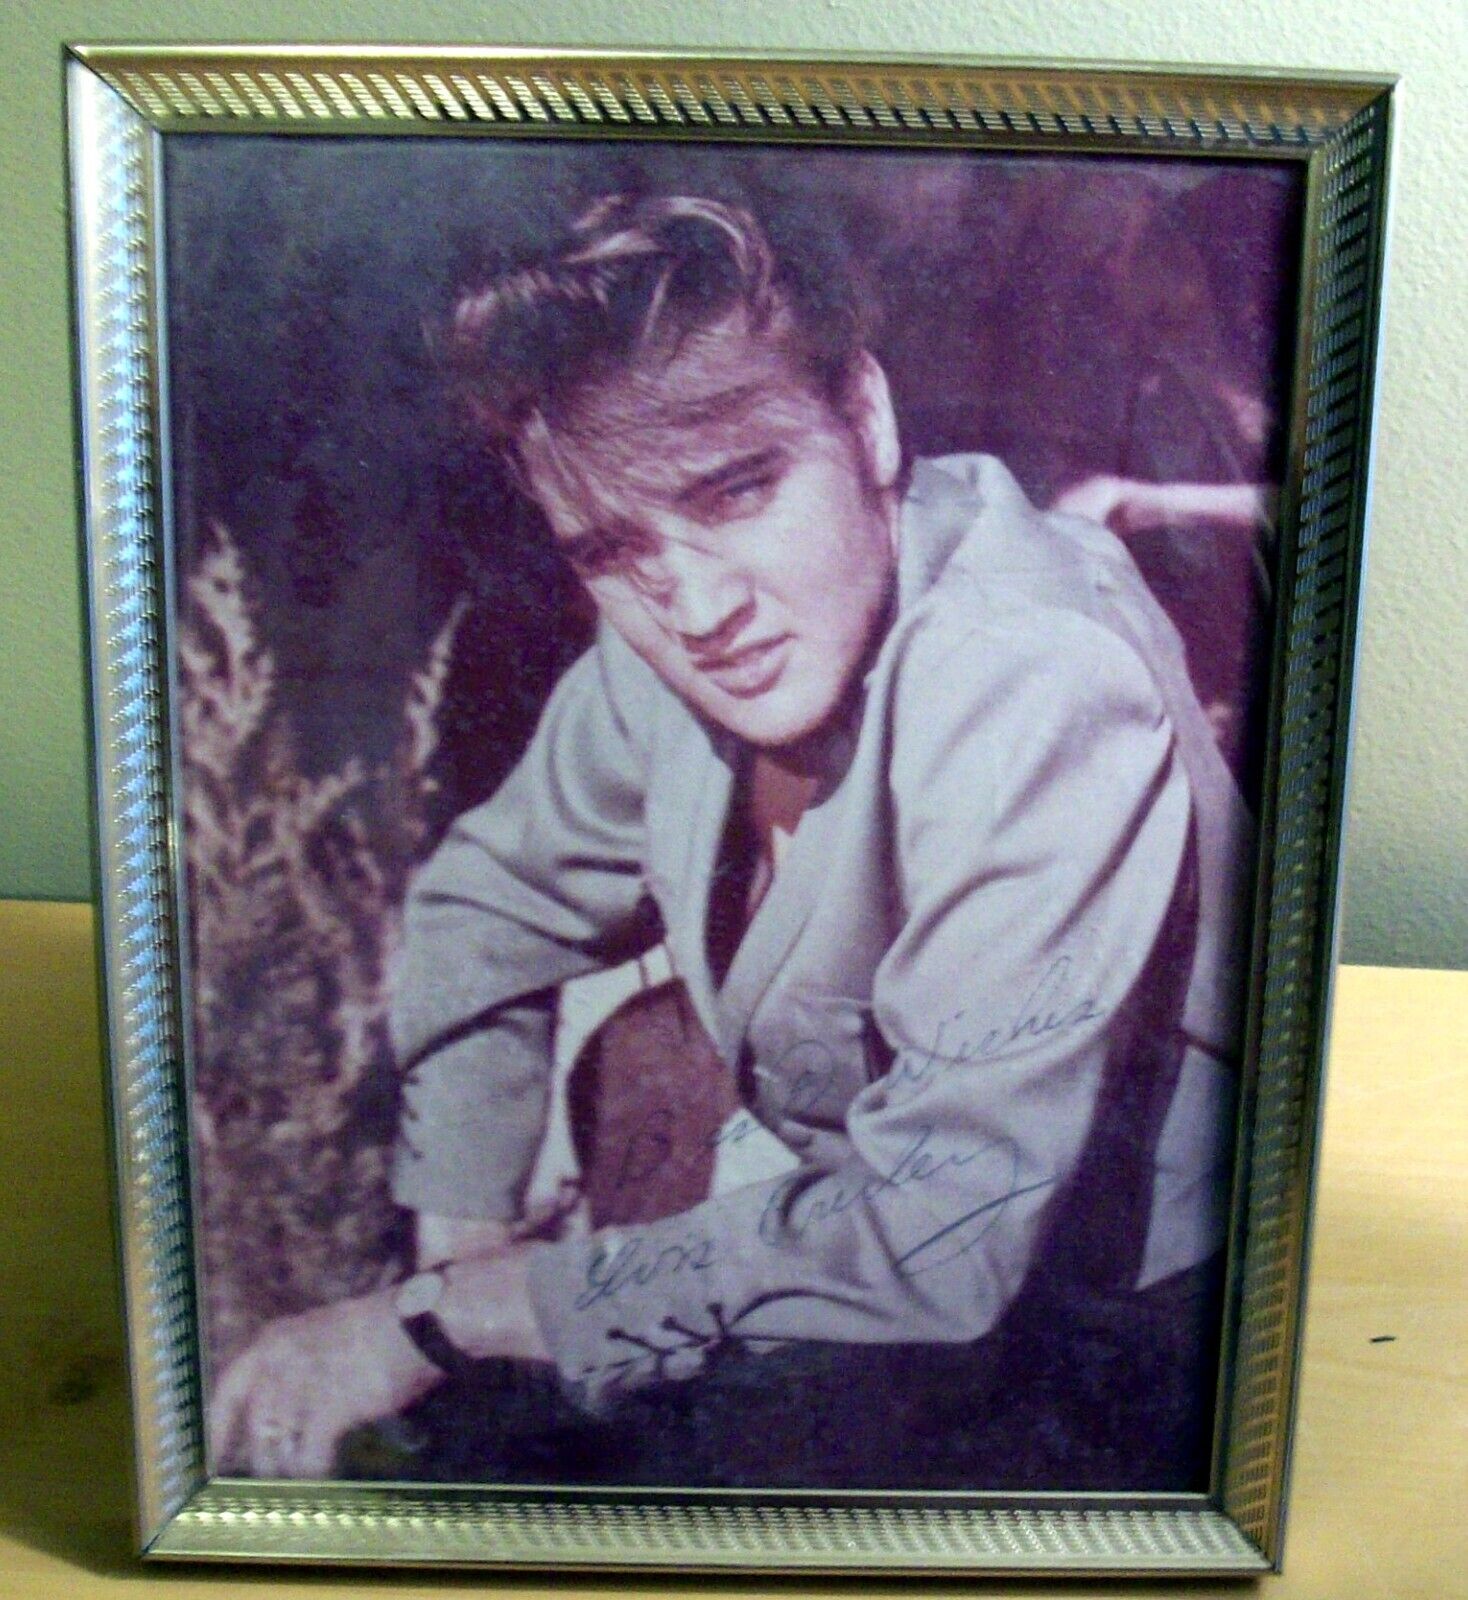 RARE 1956 Young Elvis Presley Autographed Picture Photo 8\